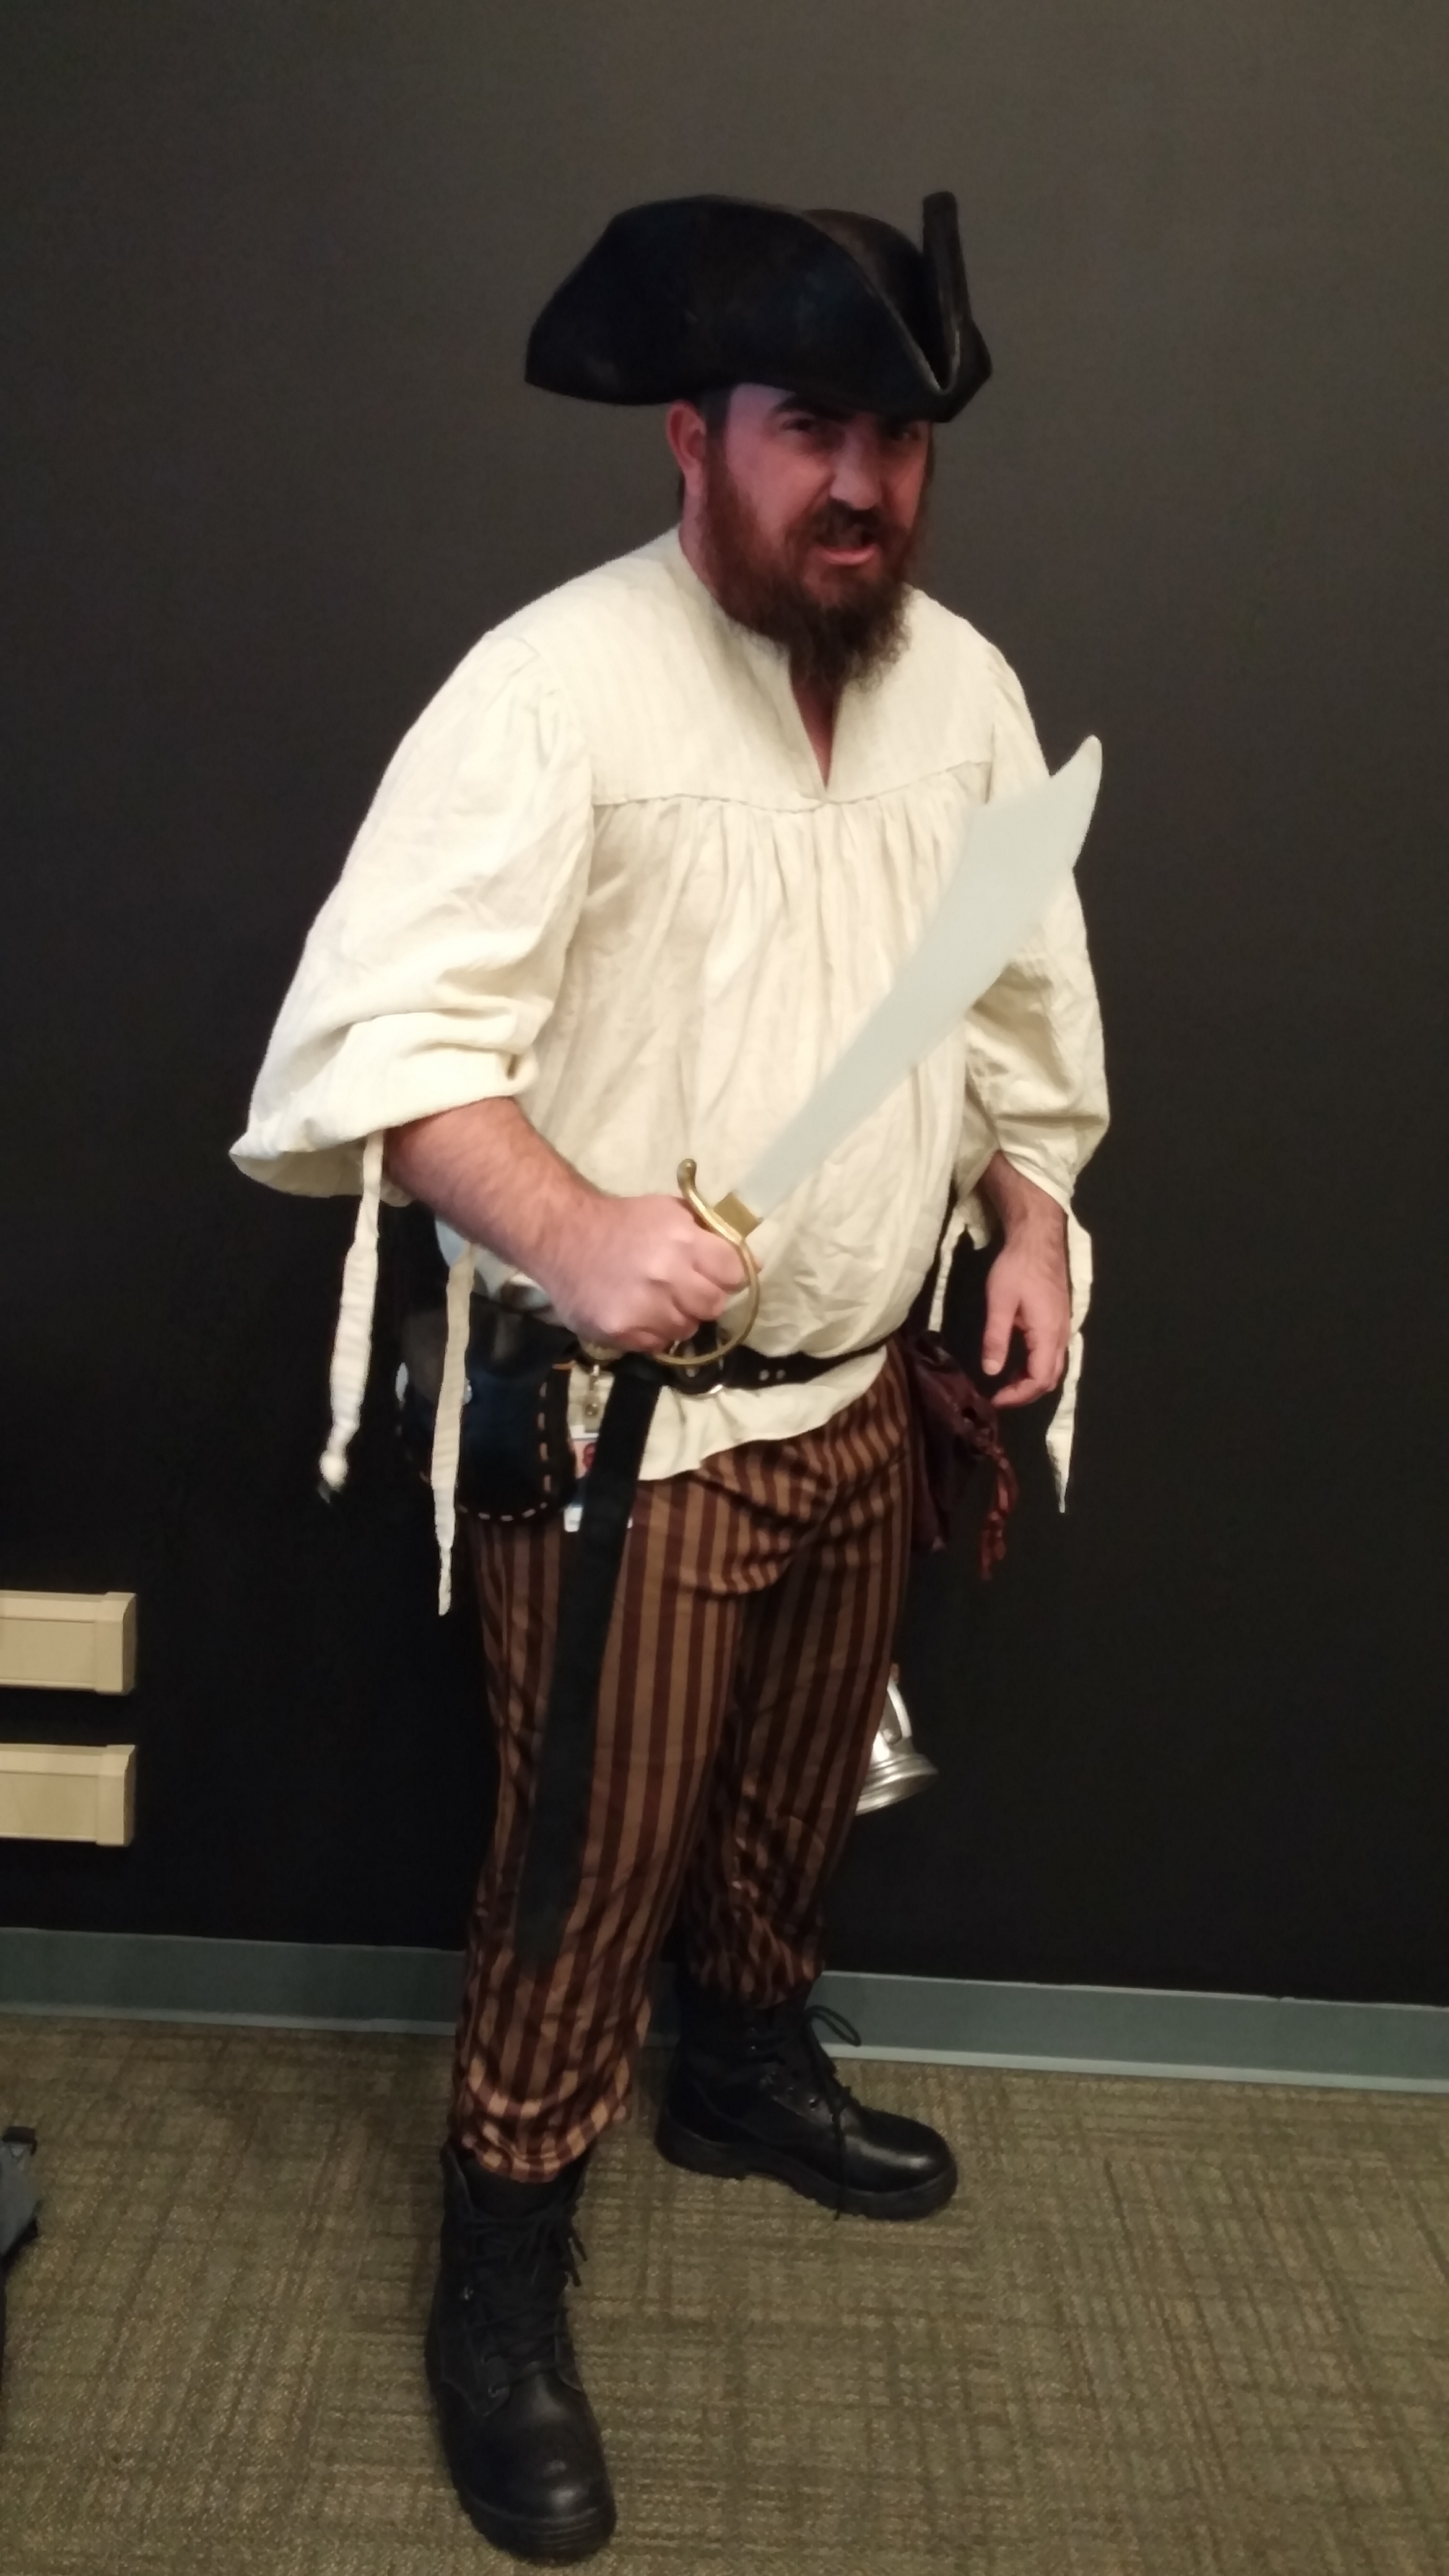 Dustin was a Pirate!